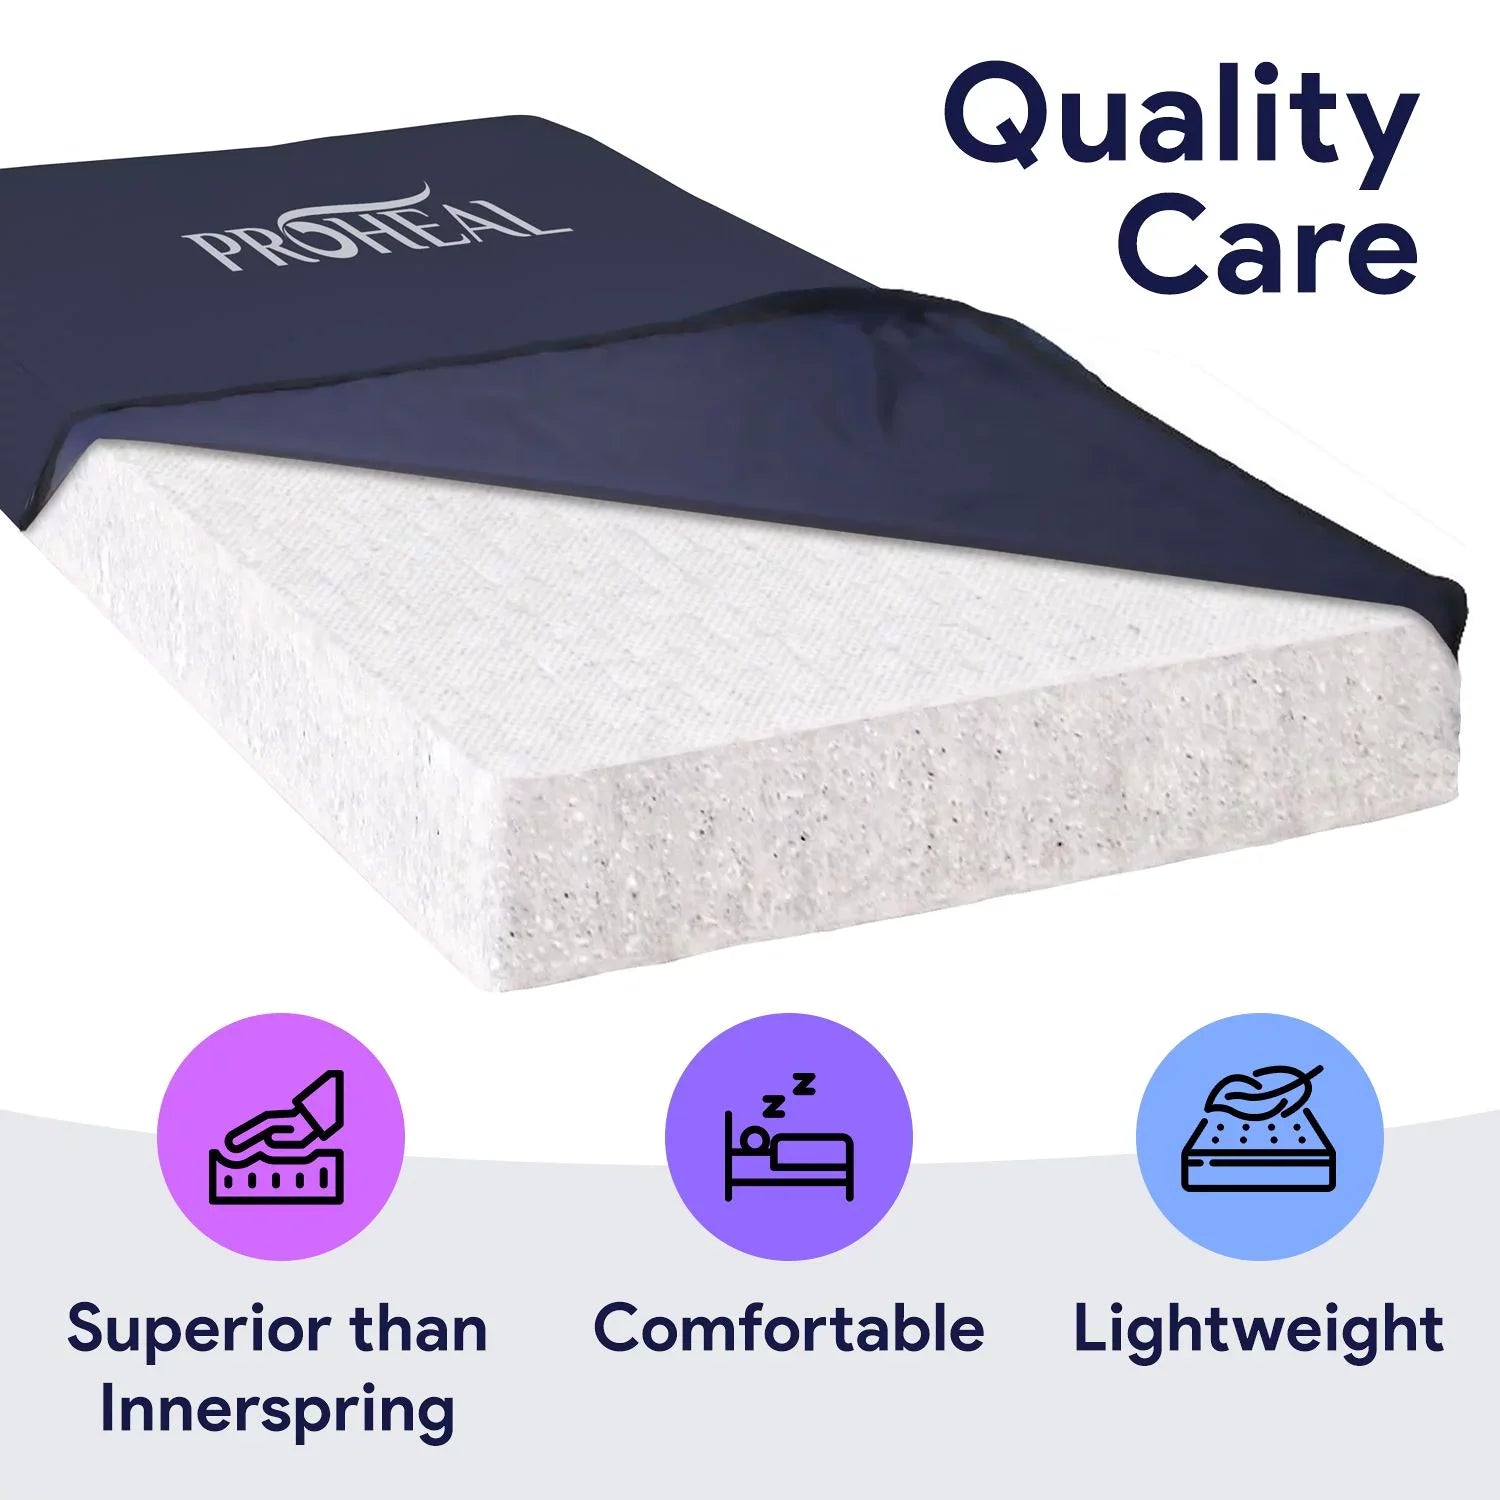 Densified Fiber Hospital Bed Mattress - Bed Sore Prevention ProHeal